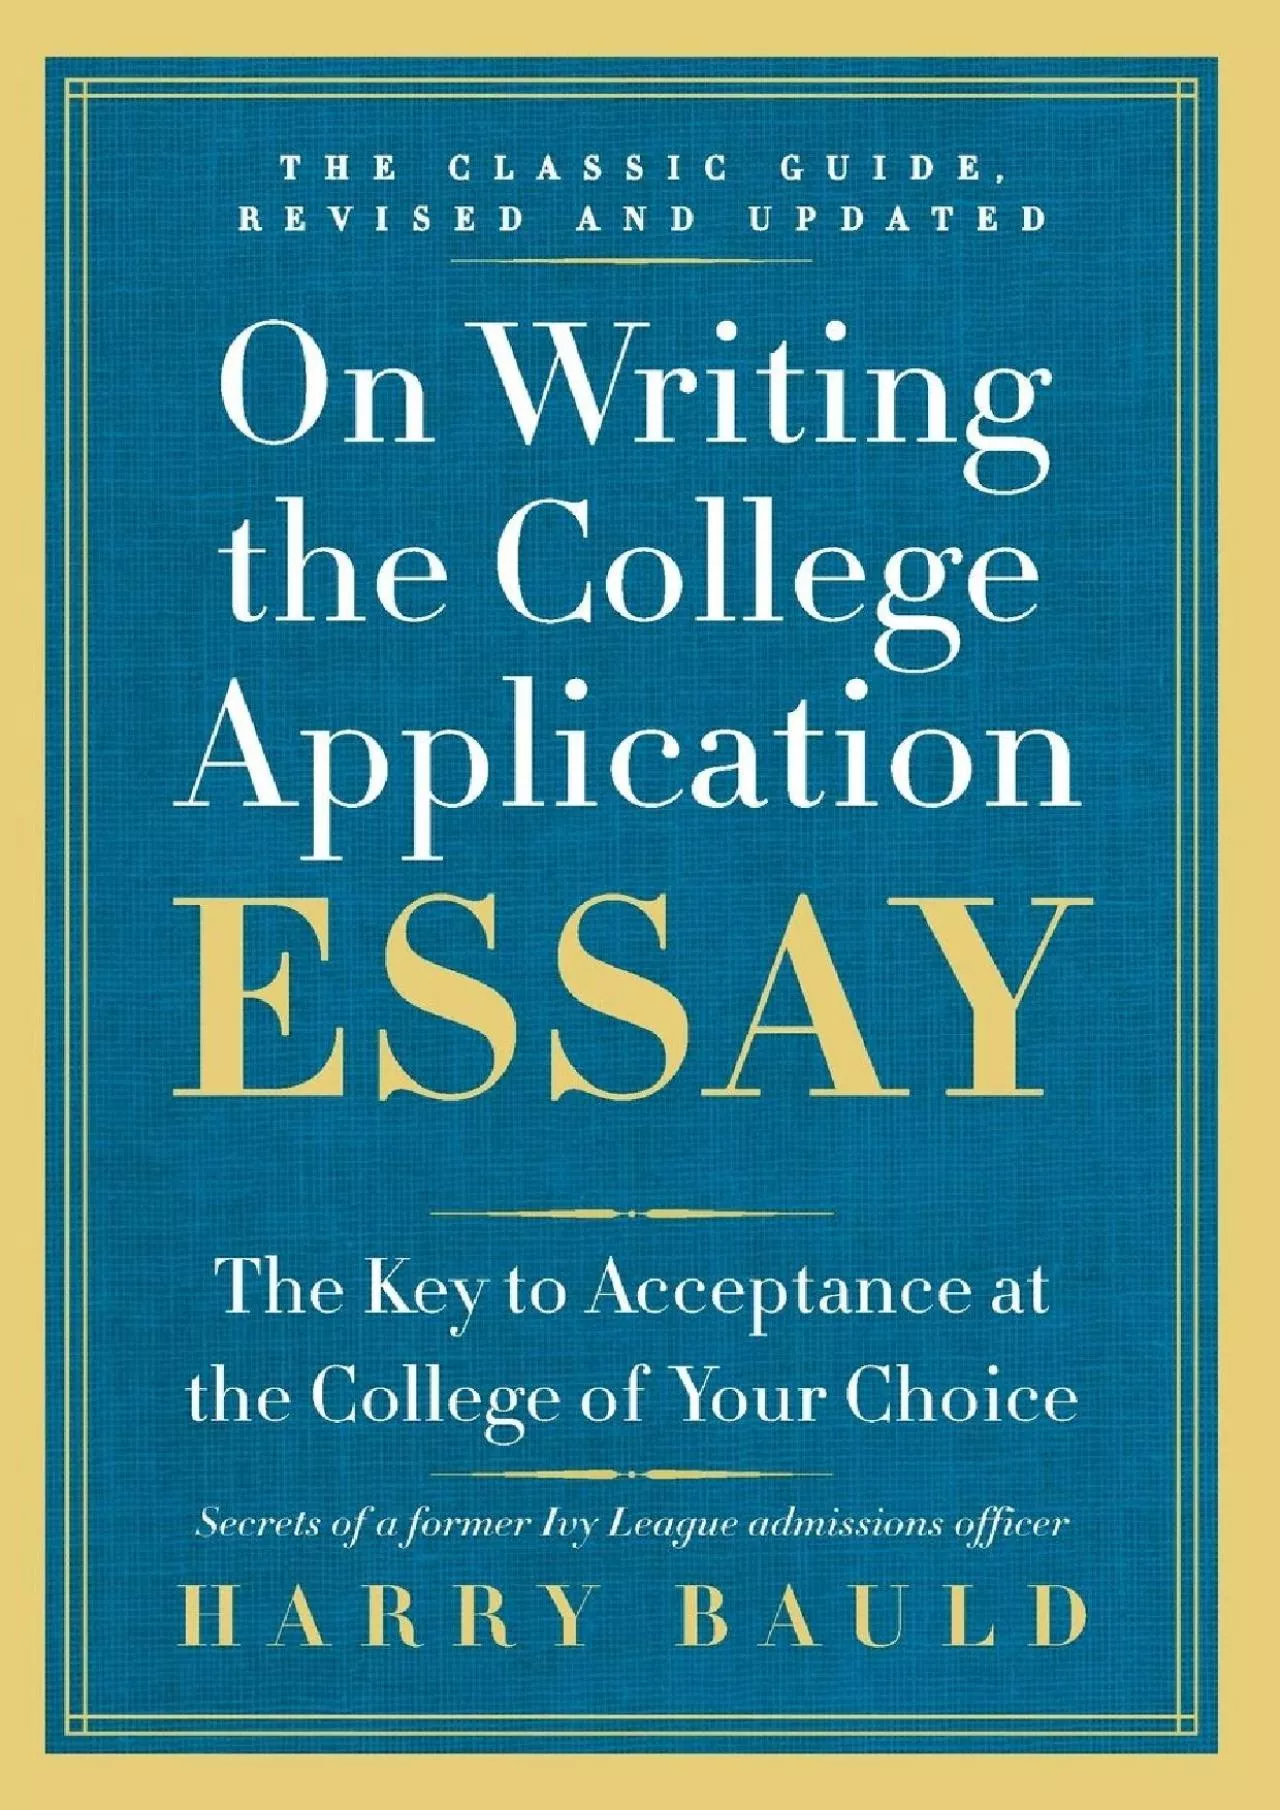 [EBOOK] On Writing the College Application Essay, 25th Anniversary Edition: The Key to